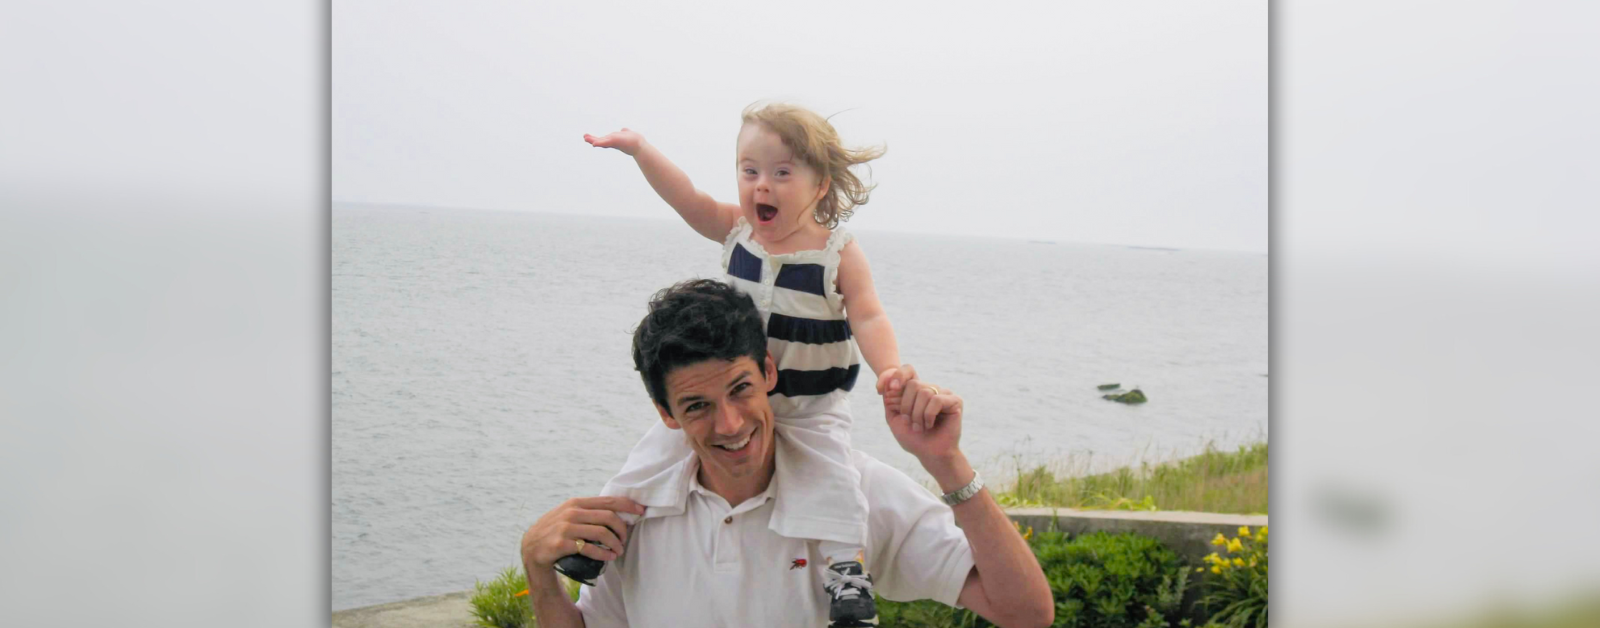 photo from 2008 of Peter holding two-year-old Penny on his shoulders with the ocean in the background]